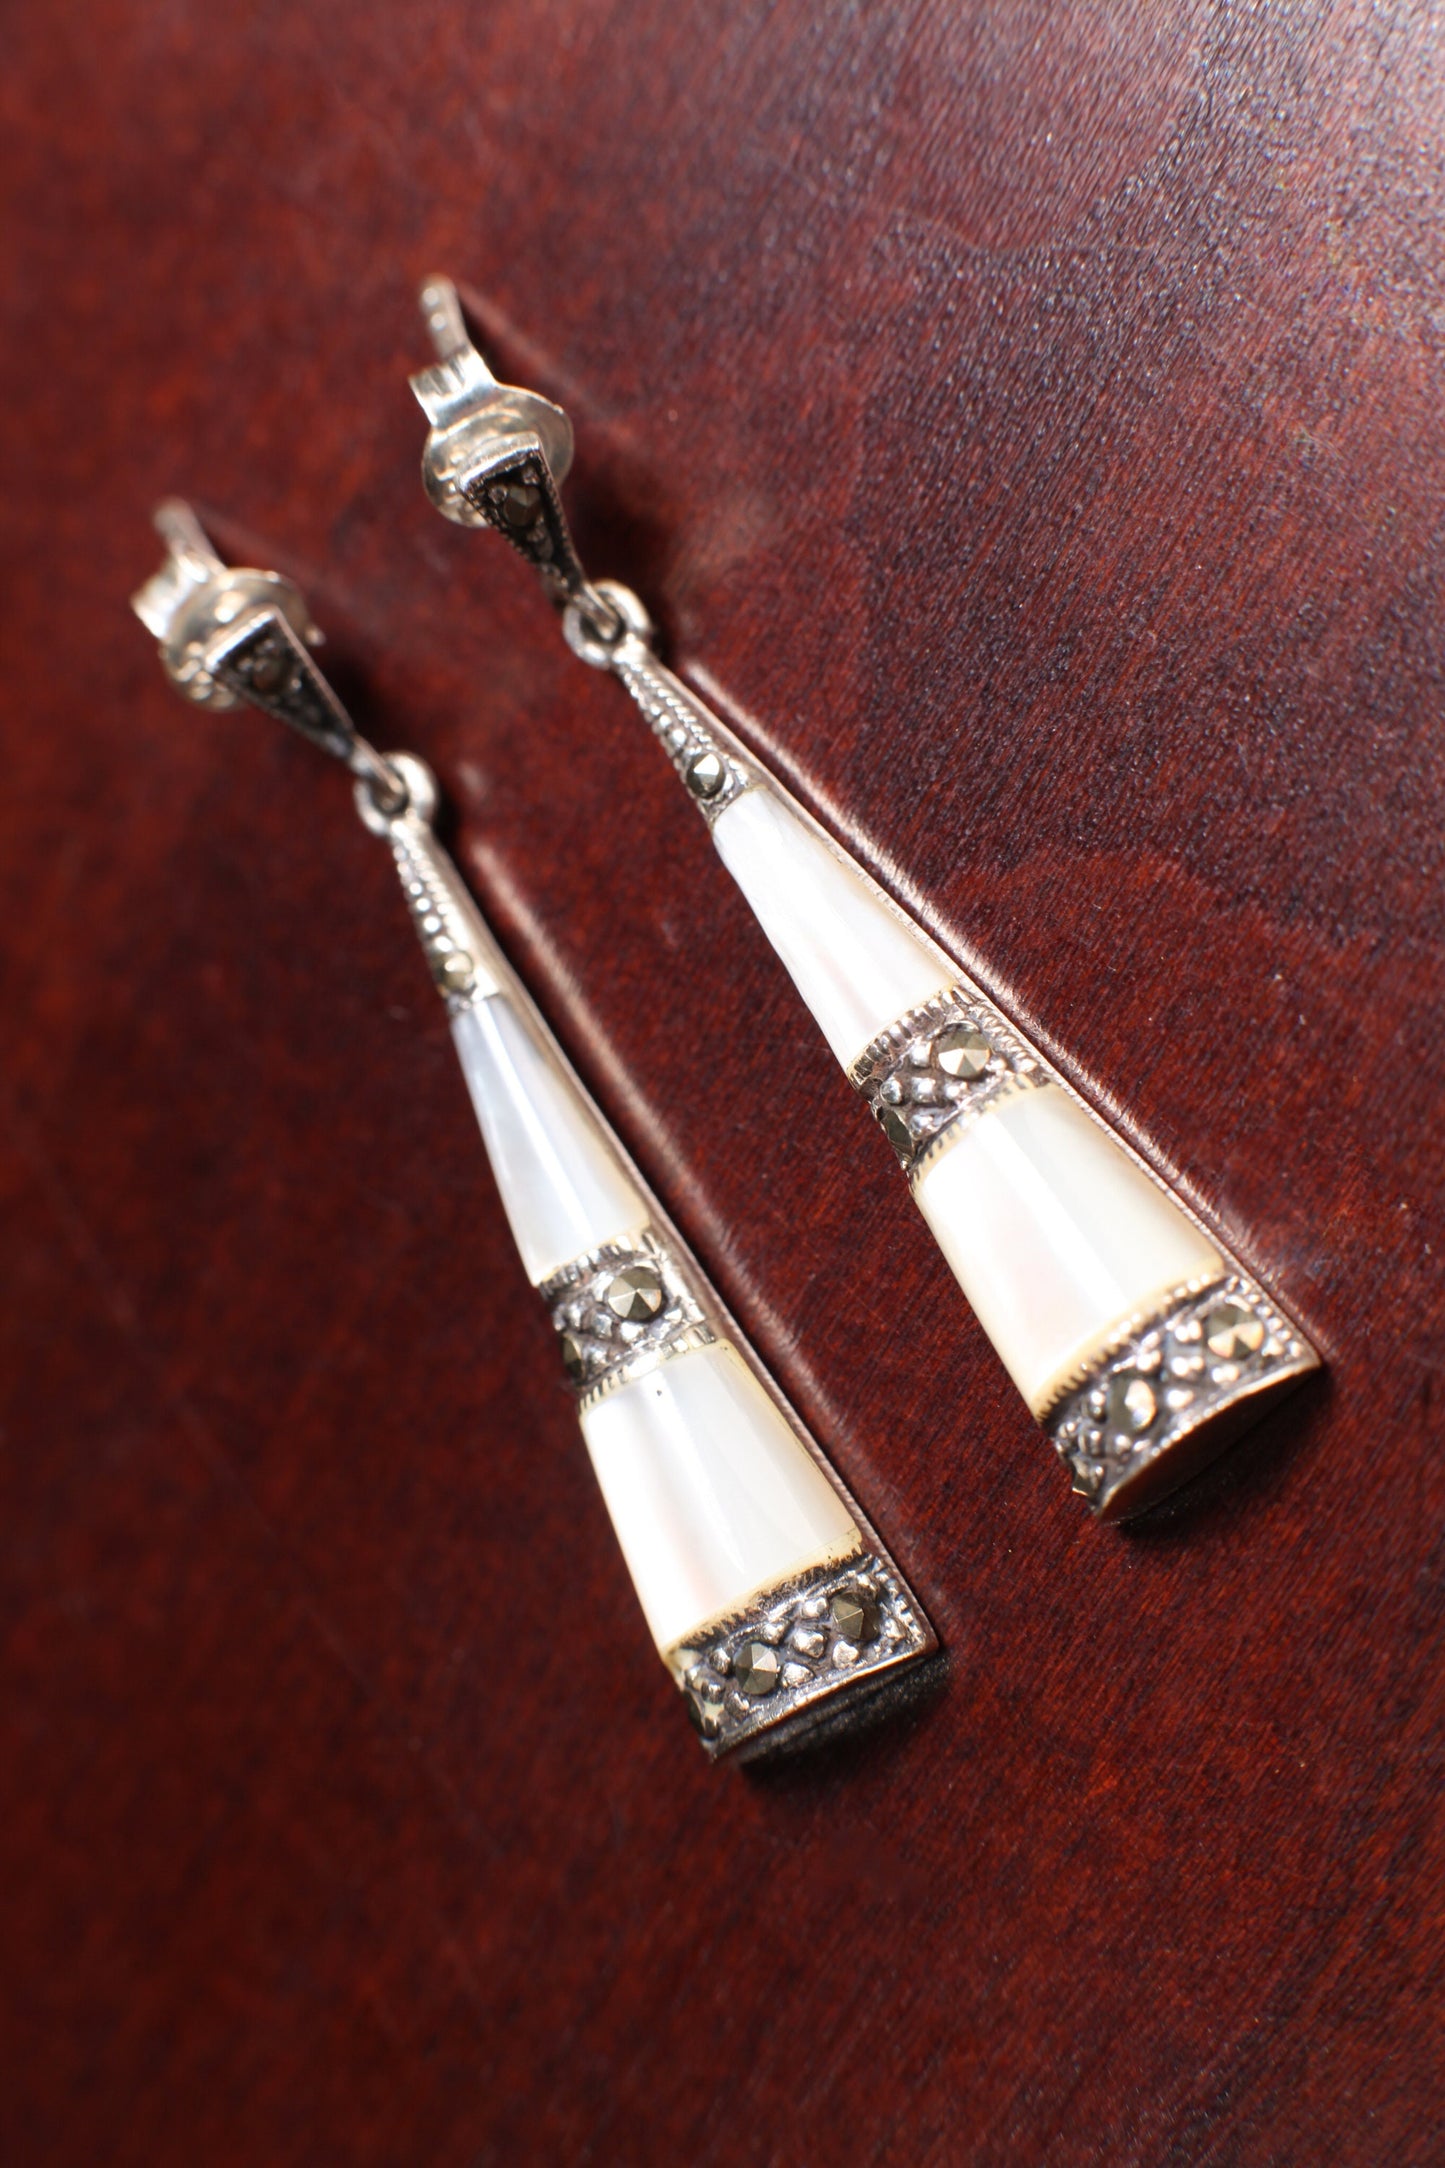 Marcasite 925 Sterling Silver Earrings Post with Dangle Triangular White Mother Of Pearl, Vintage, Antique Marcasite Earrings Gift for her